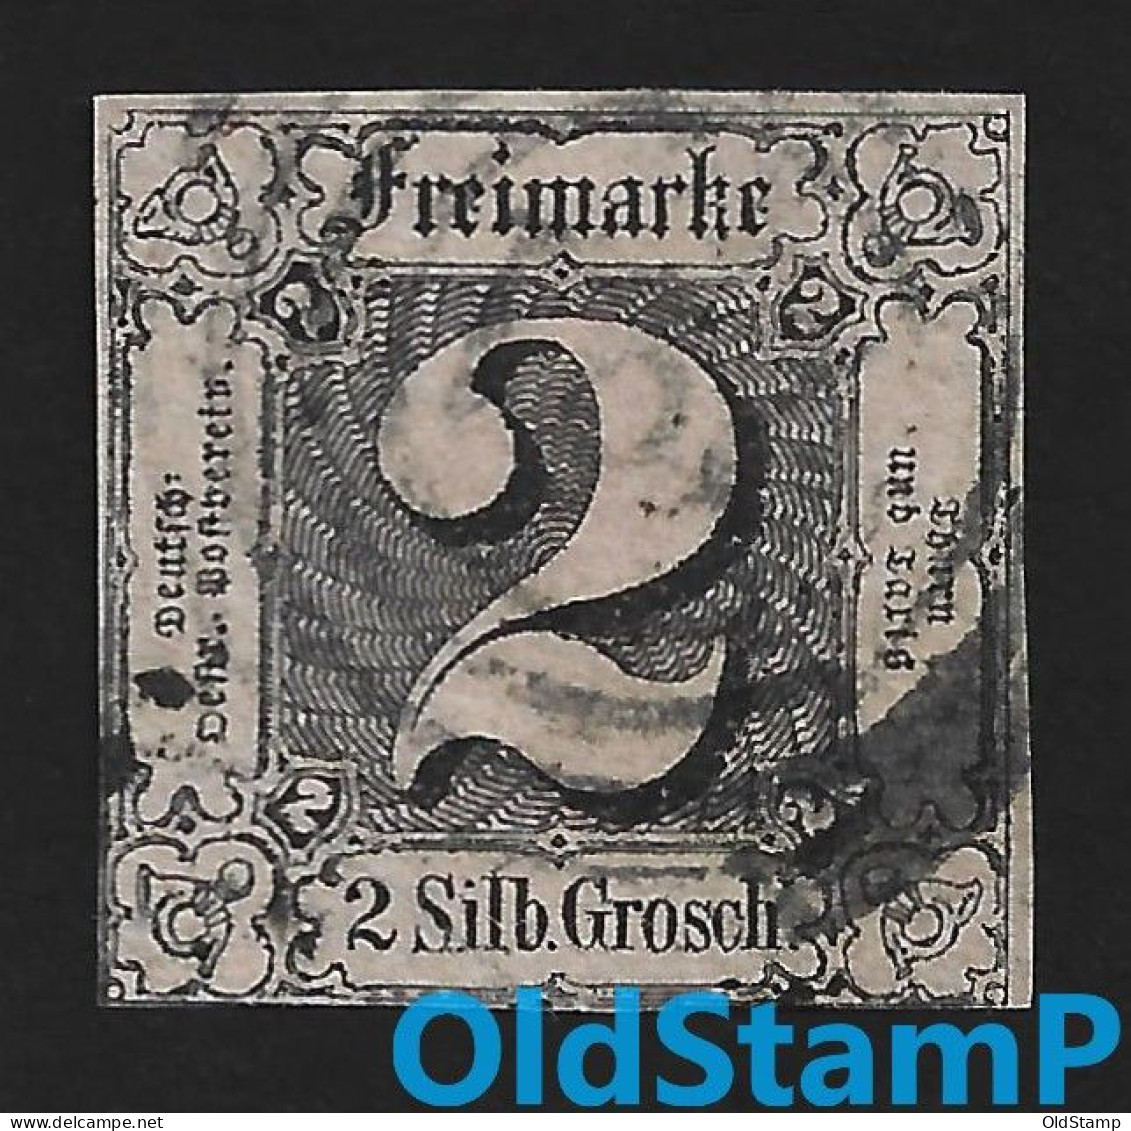 THURN Und TAXIS 1852 Mi.# 5 BPP Signed 4-Ring Gestempelt / Allemagne Alemania Altdeutschland Old Germany States - Used